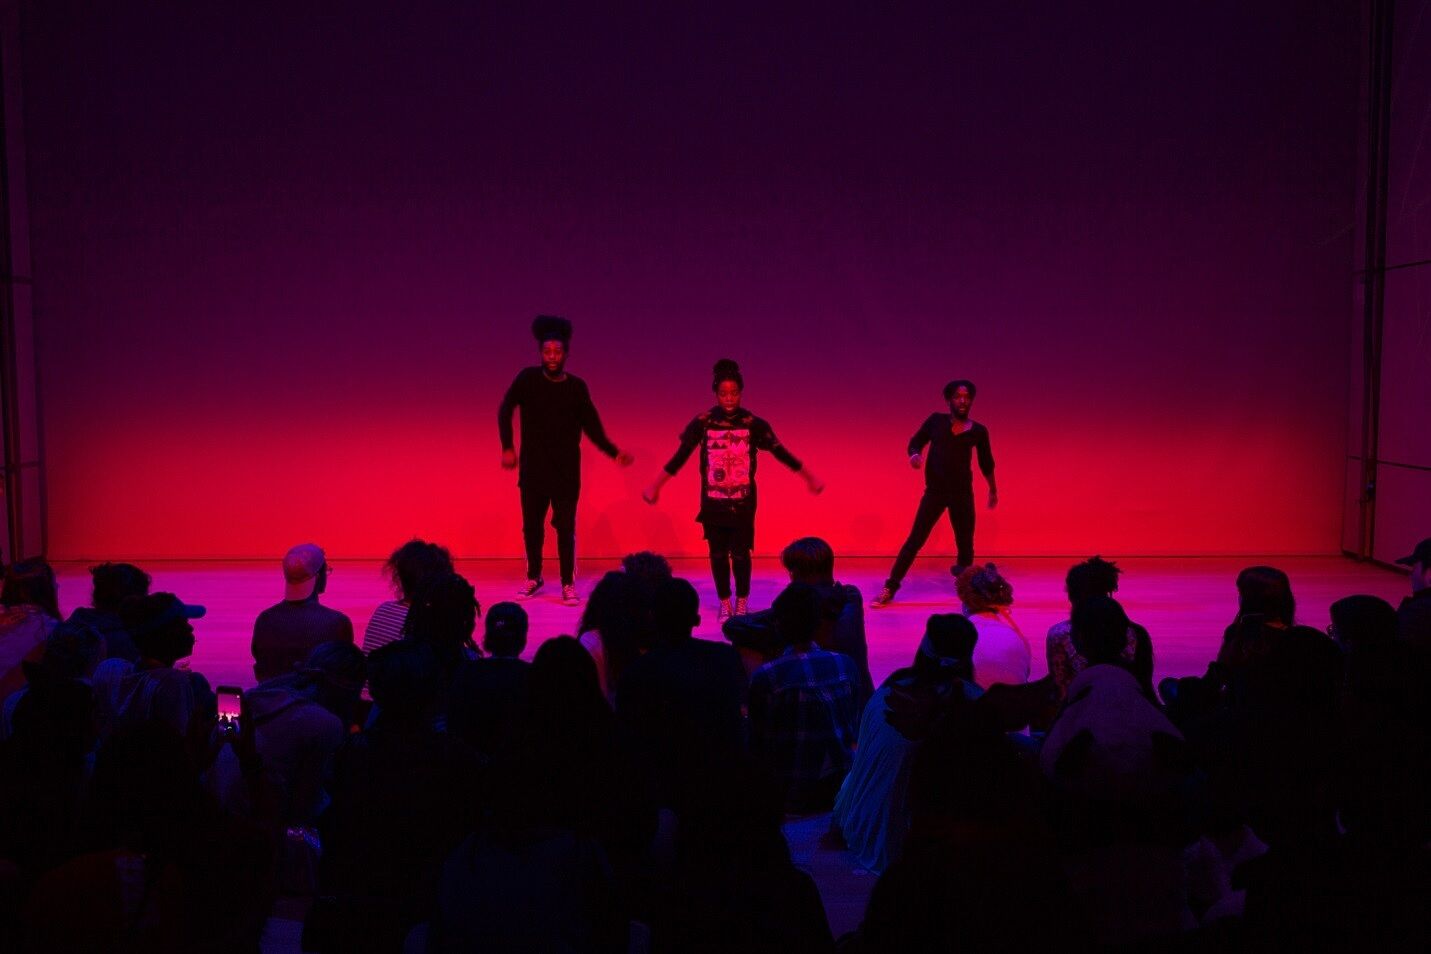 Three teens dance on stage during a museum event.